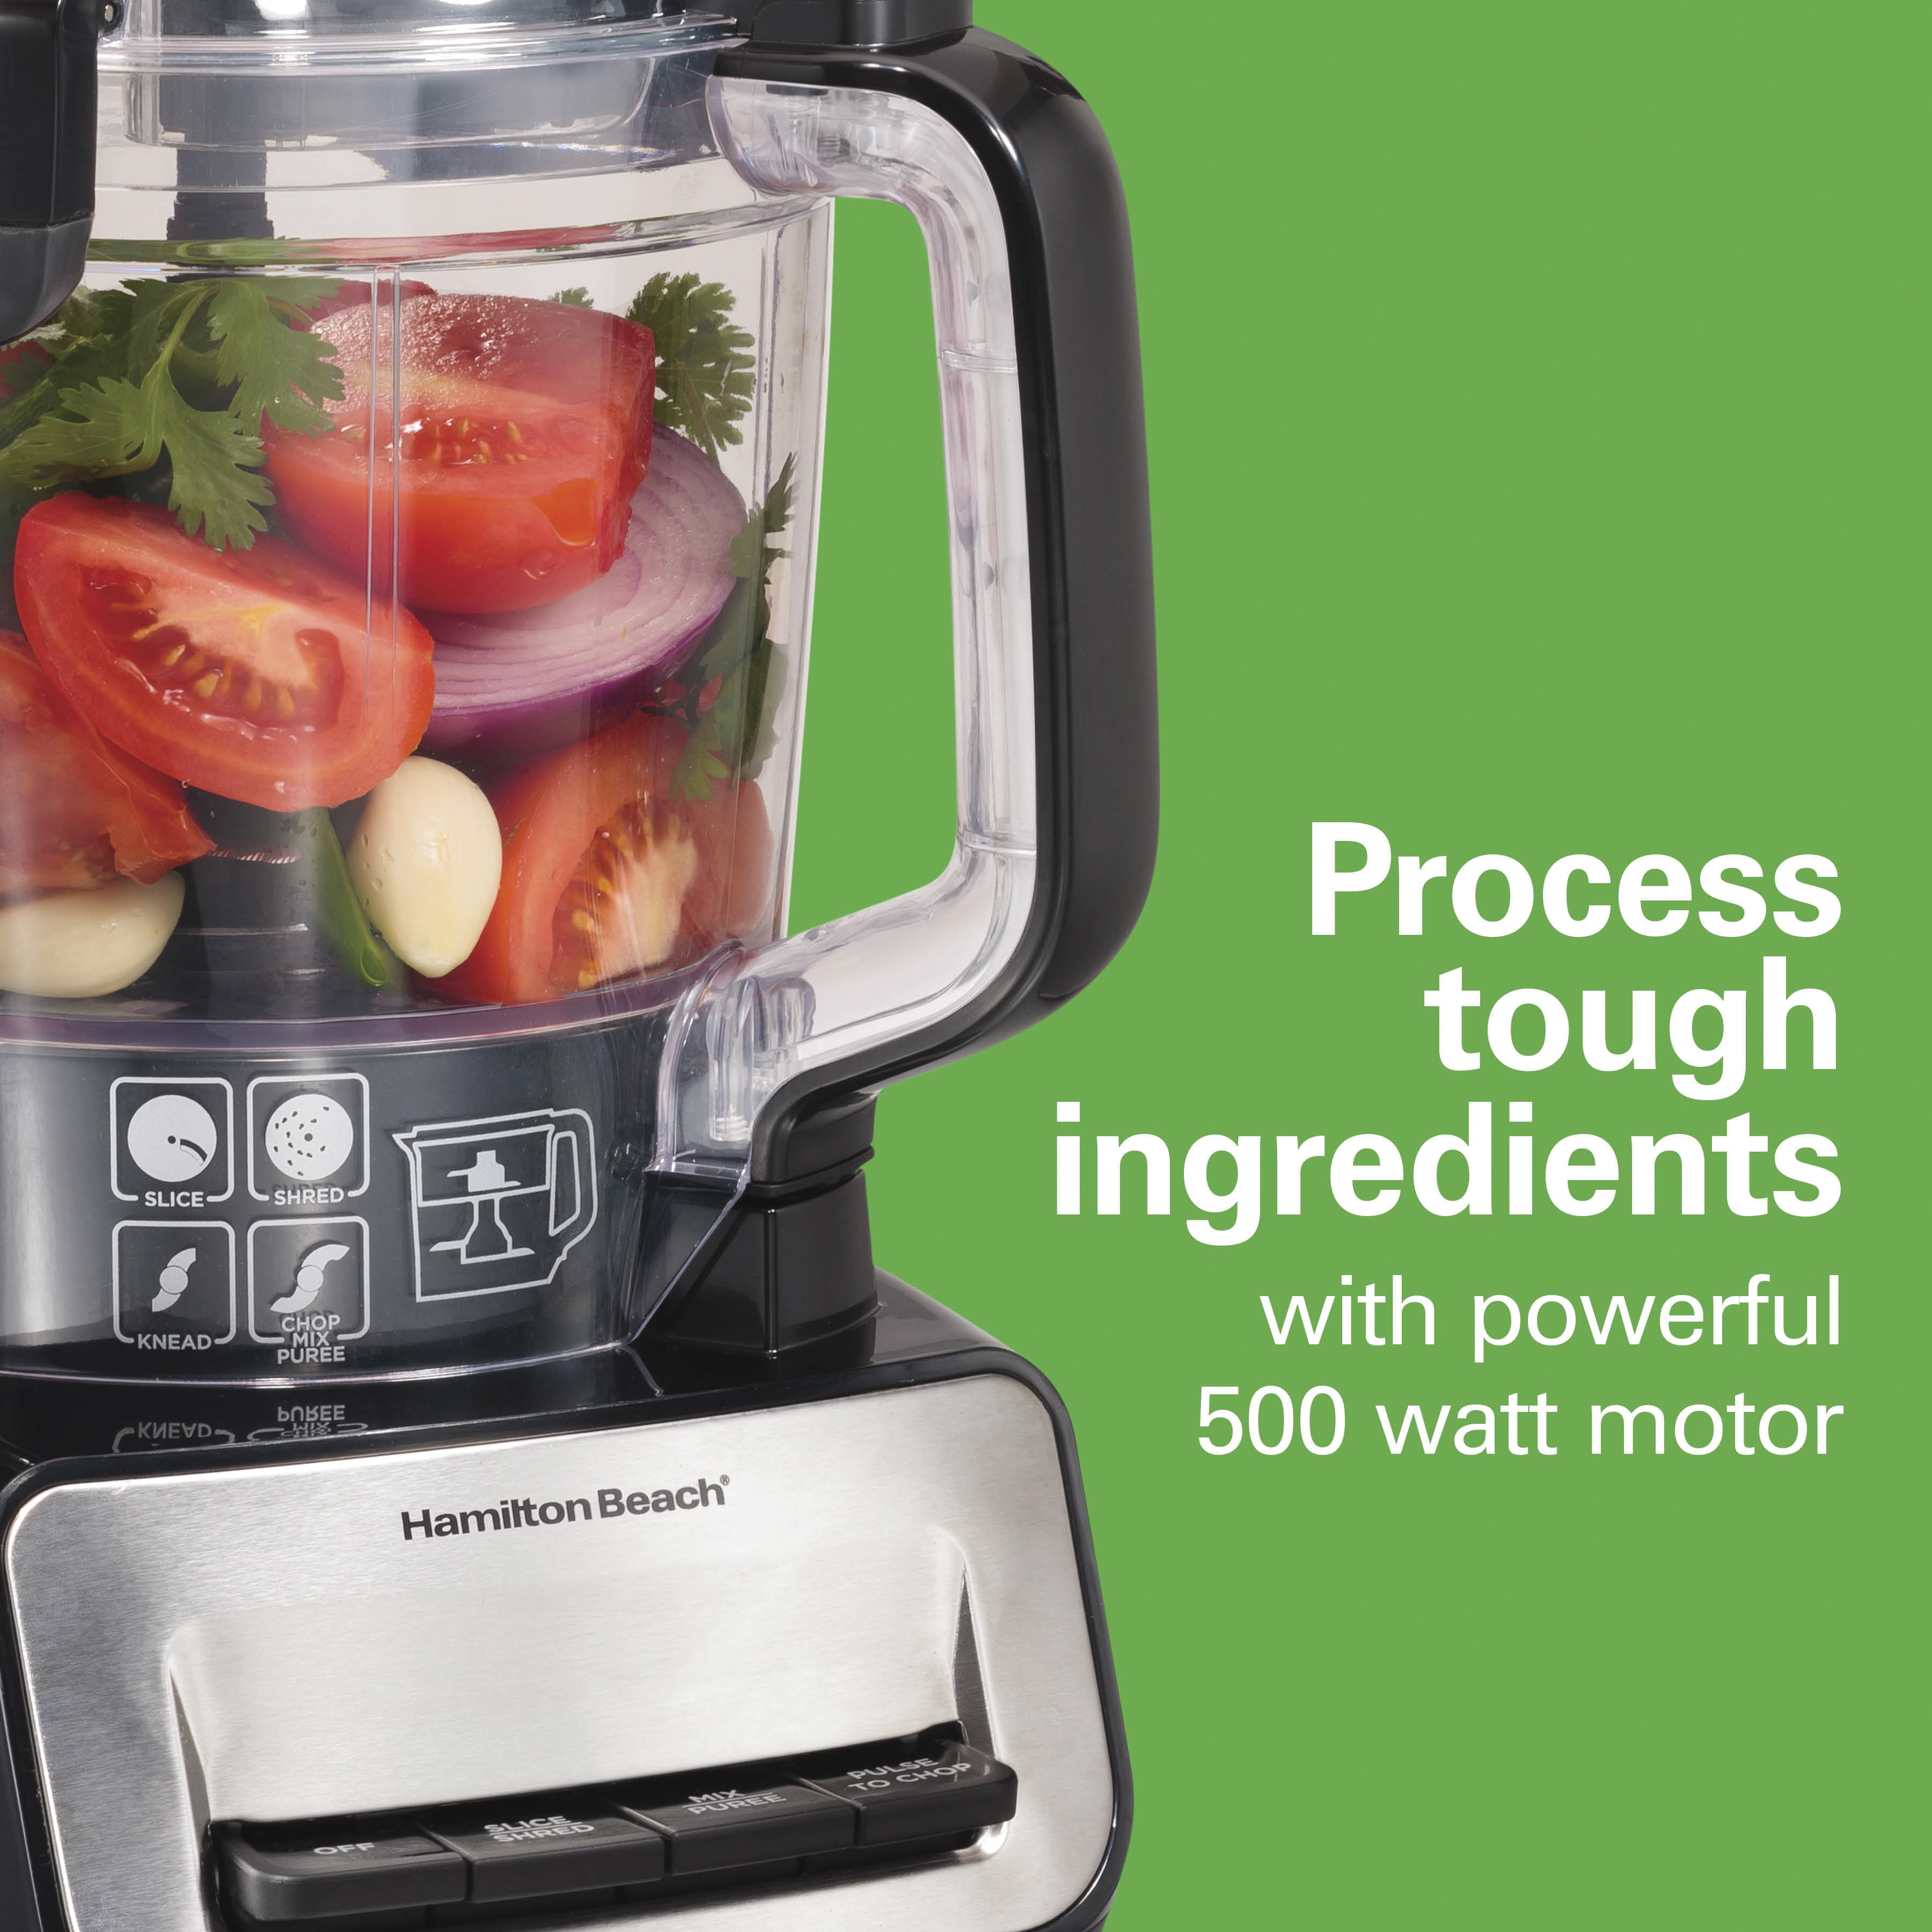 Best Buy: Hamilton Beach Stack and Snap 14 Cup Duo Food Processor